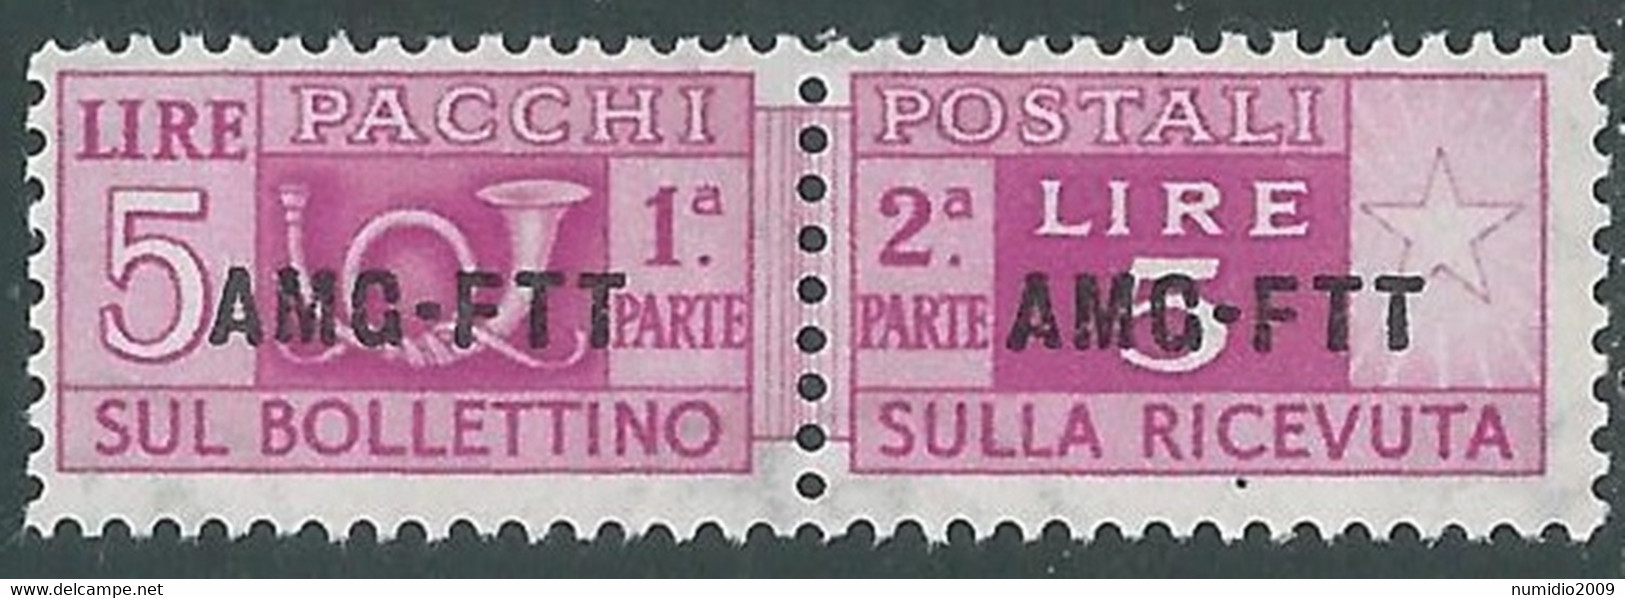 1949-53 TRIESTE A PACCHI POSTALI 5 LIRE MH * - RE25-4 - Postal And Consigned Parcels